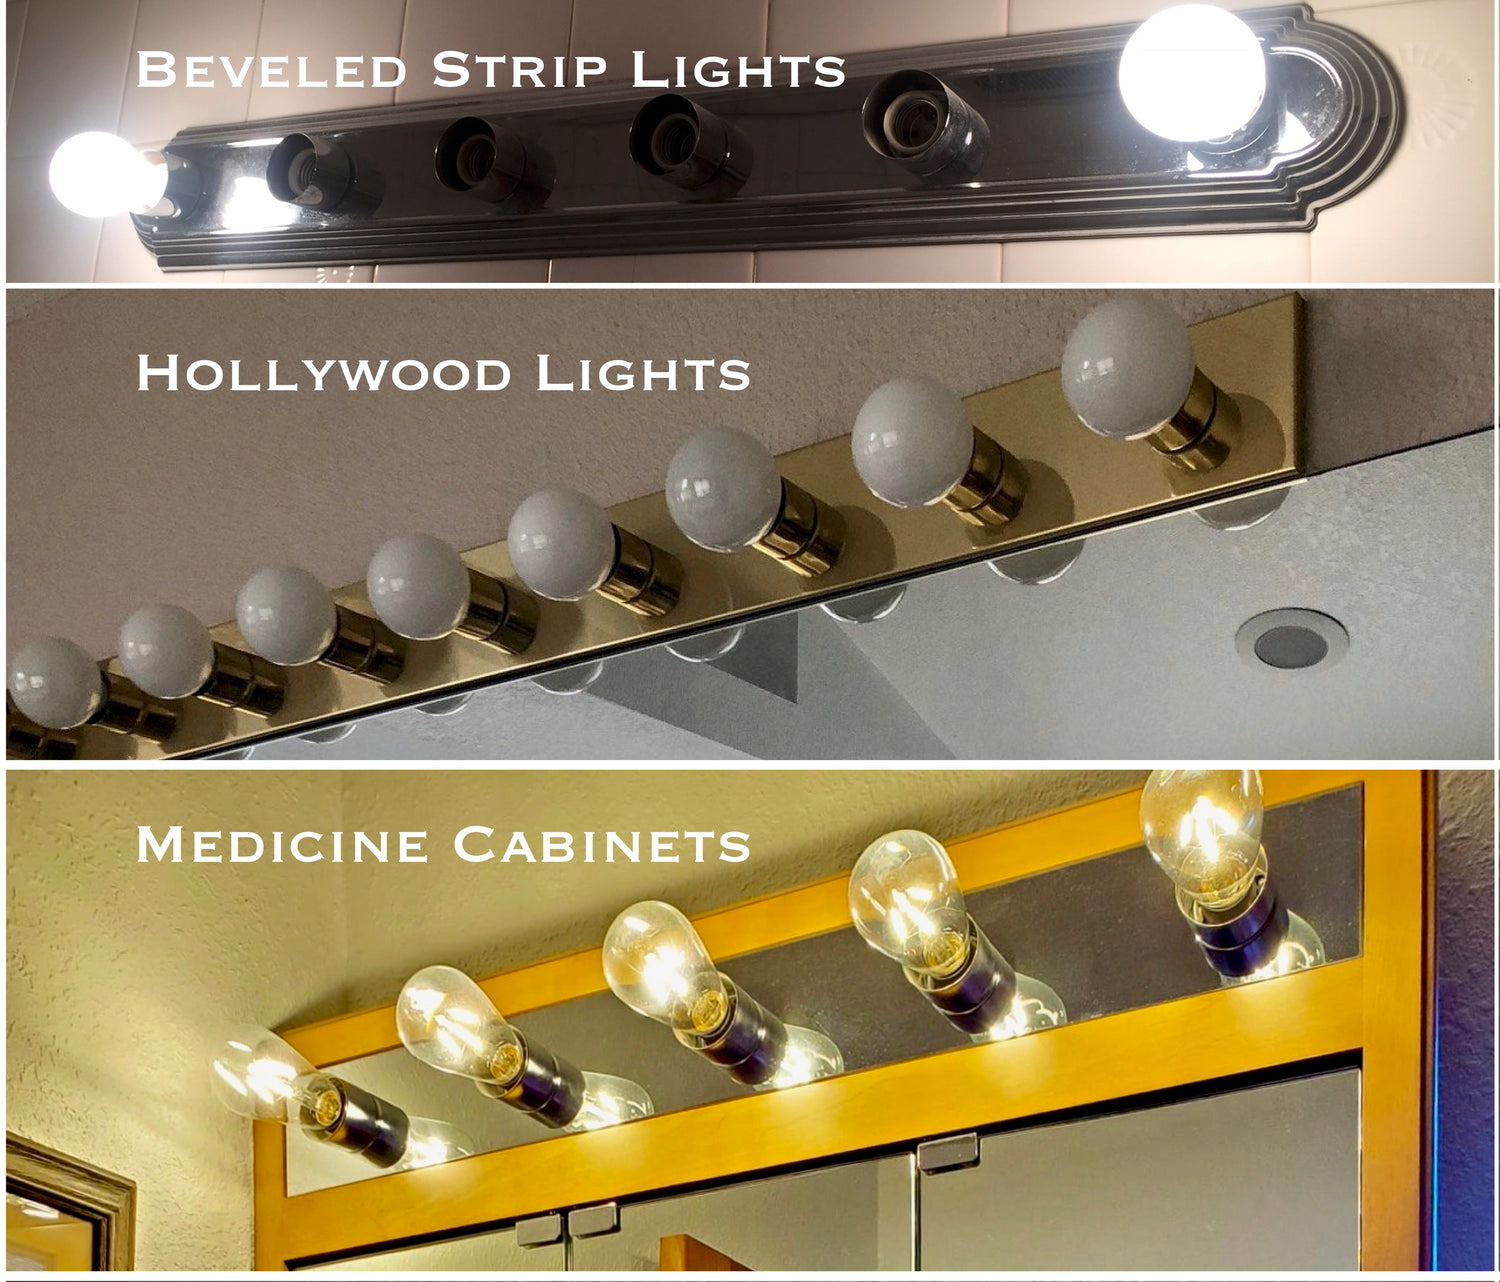 This pic shows 3 types of strip lights that our EzLightWraps cover - a beveled edge fixture with a few bulbs missing, a standard 8 bulb Hollywood Light in gold, and a medicine cabinet with built in lights. This one has Edison bulbs but we can hide those too. Usually you want smaller light bulbs in medicine cabinets.